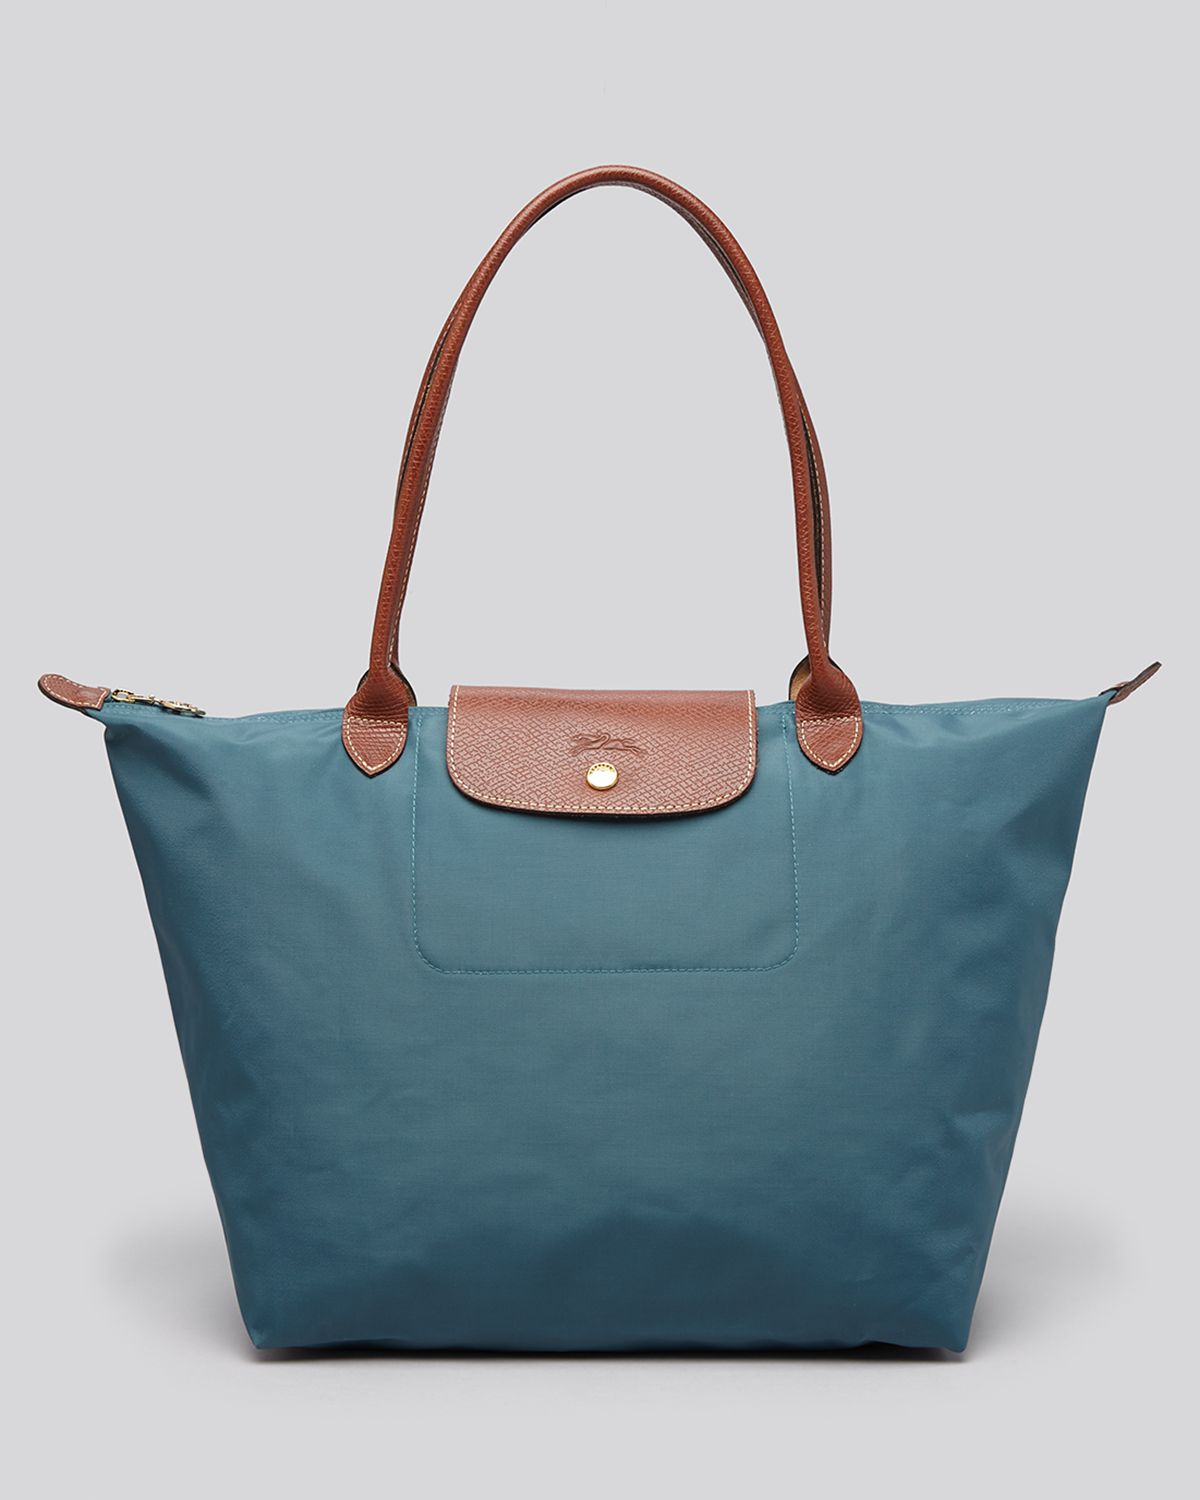 Longchamp Synthetic Tote - Le Pliage Large Shoulder in Mint (Green) - Lyst